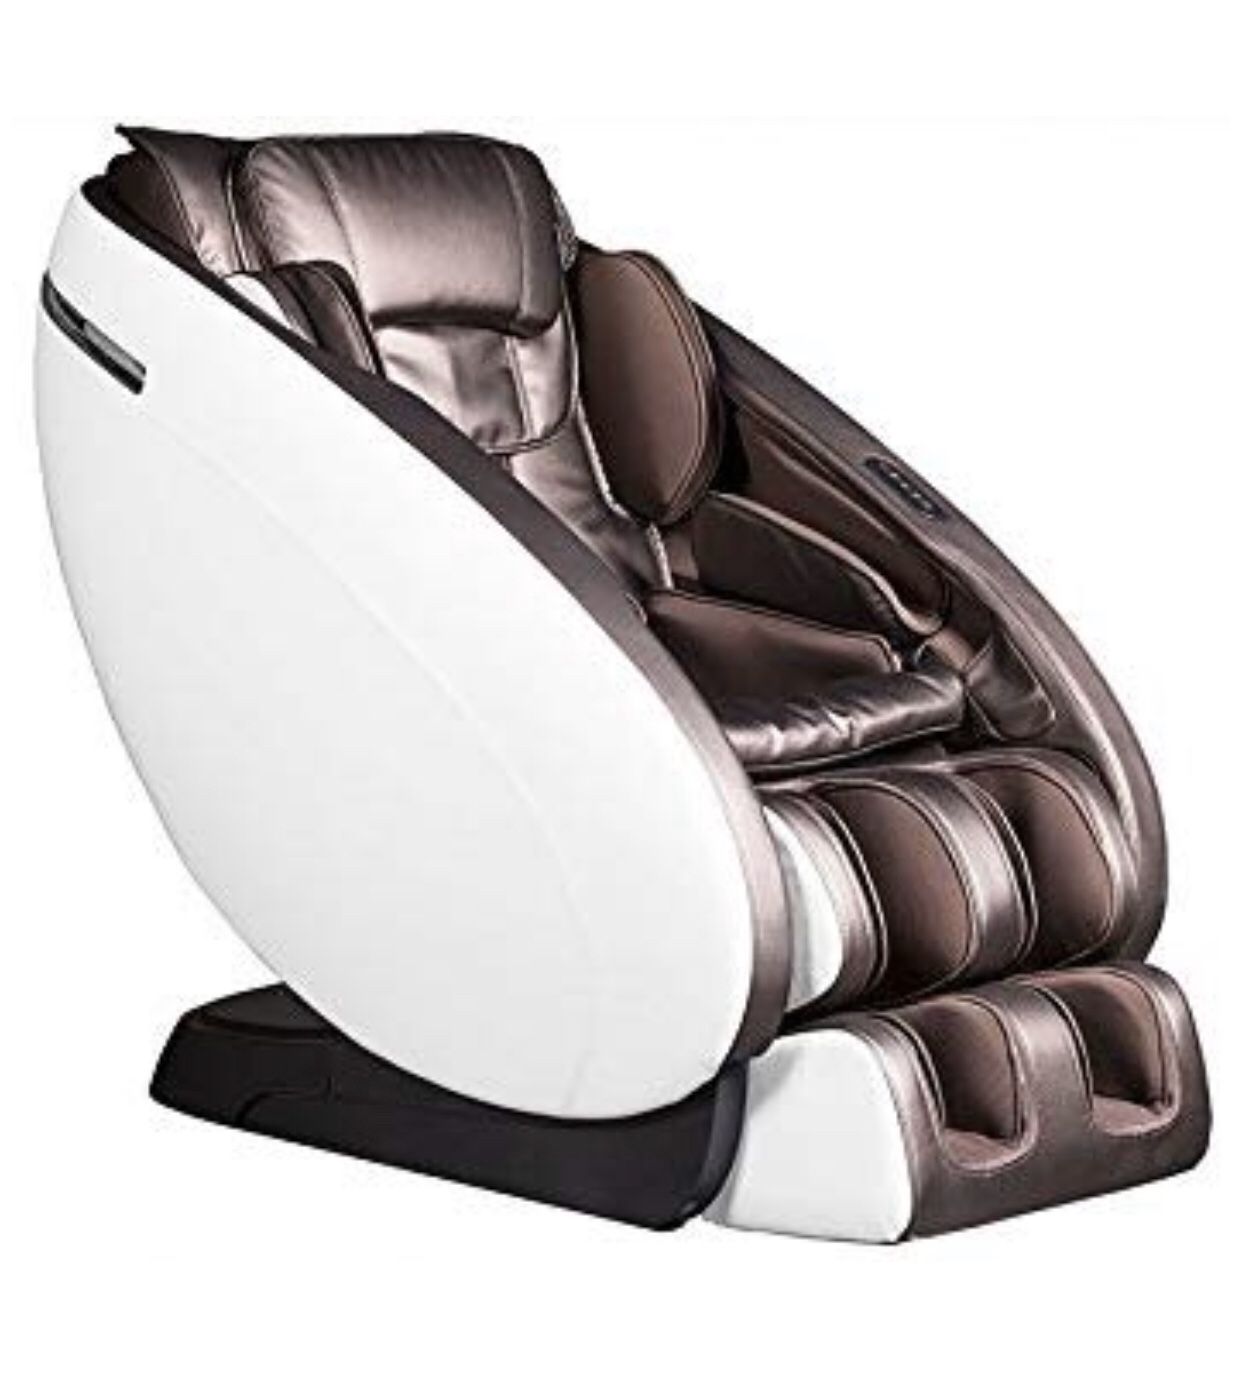 Massage chair- sale or trade